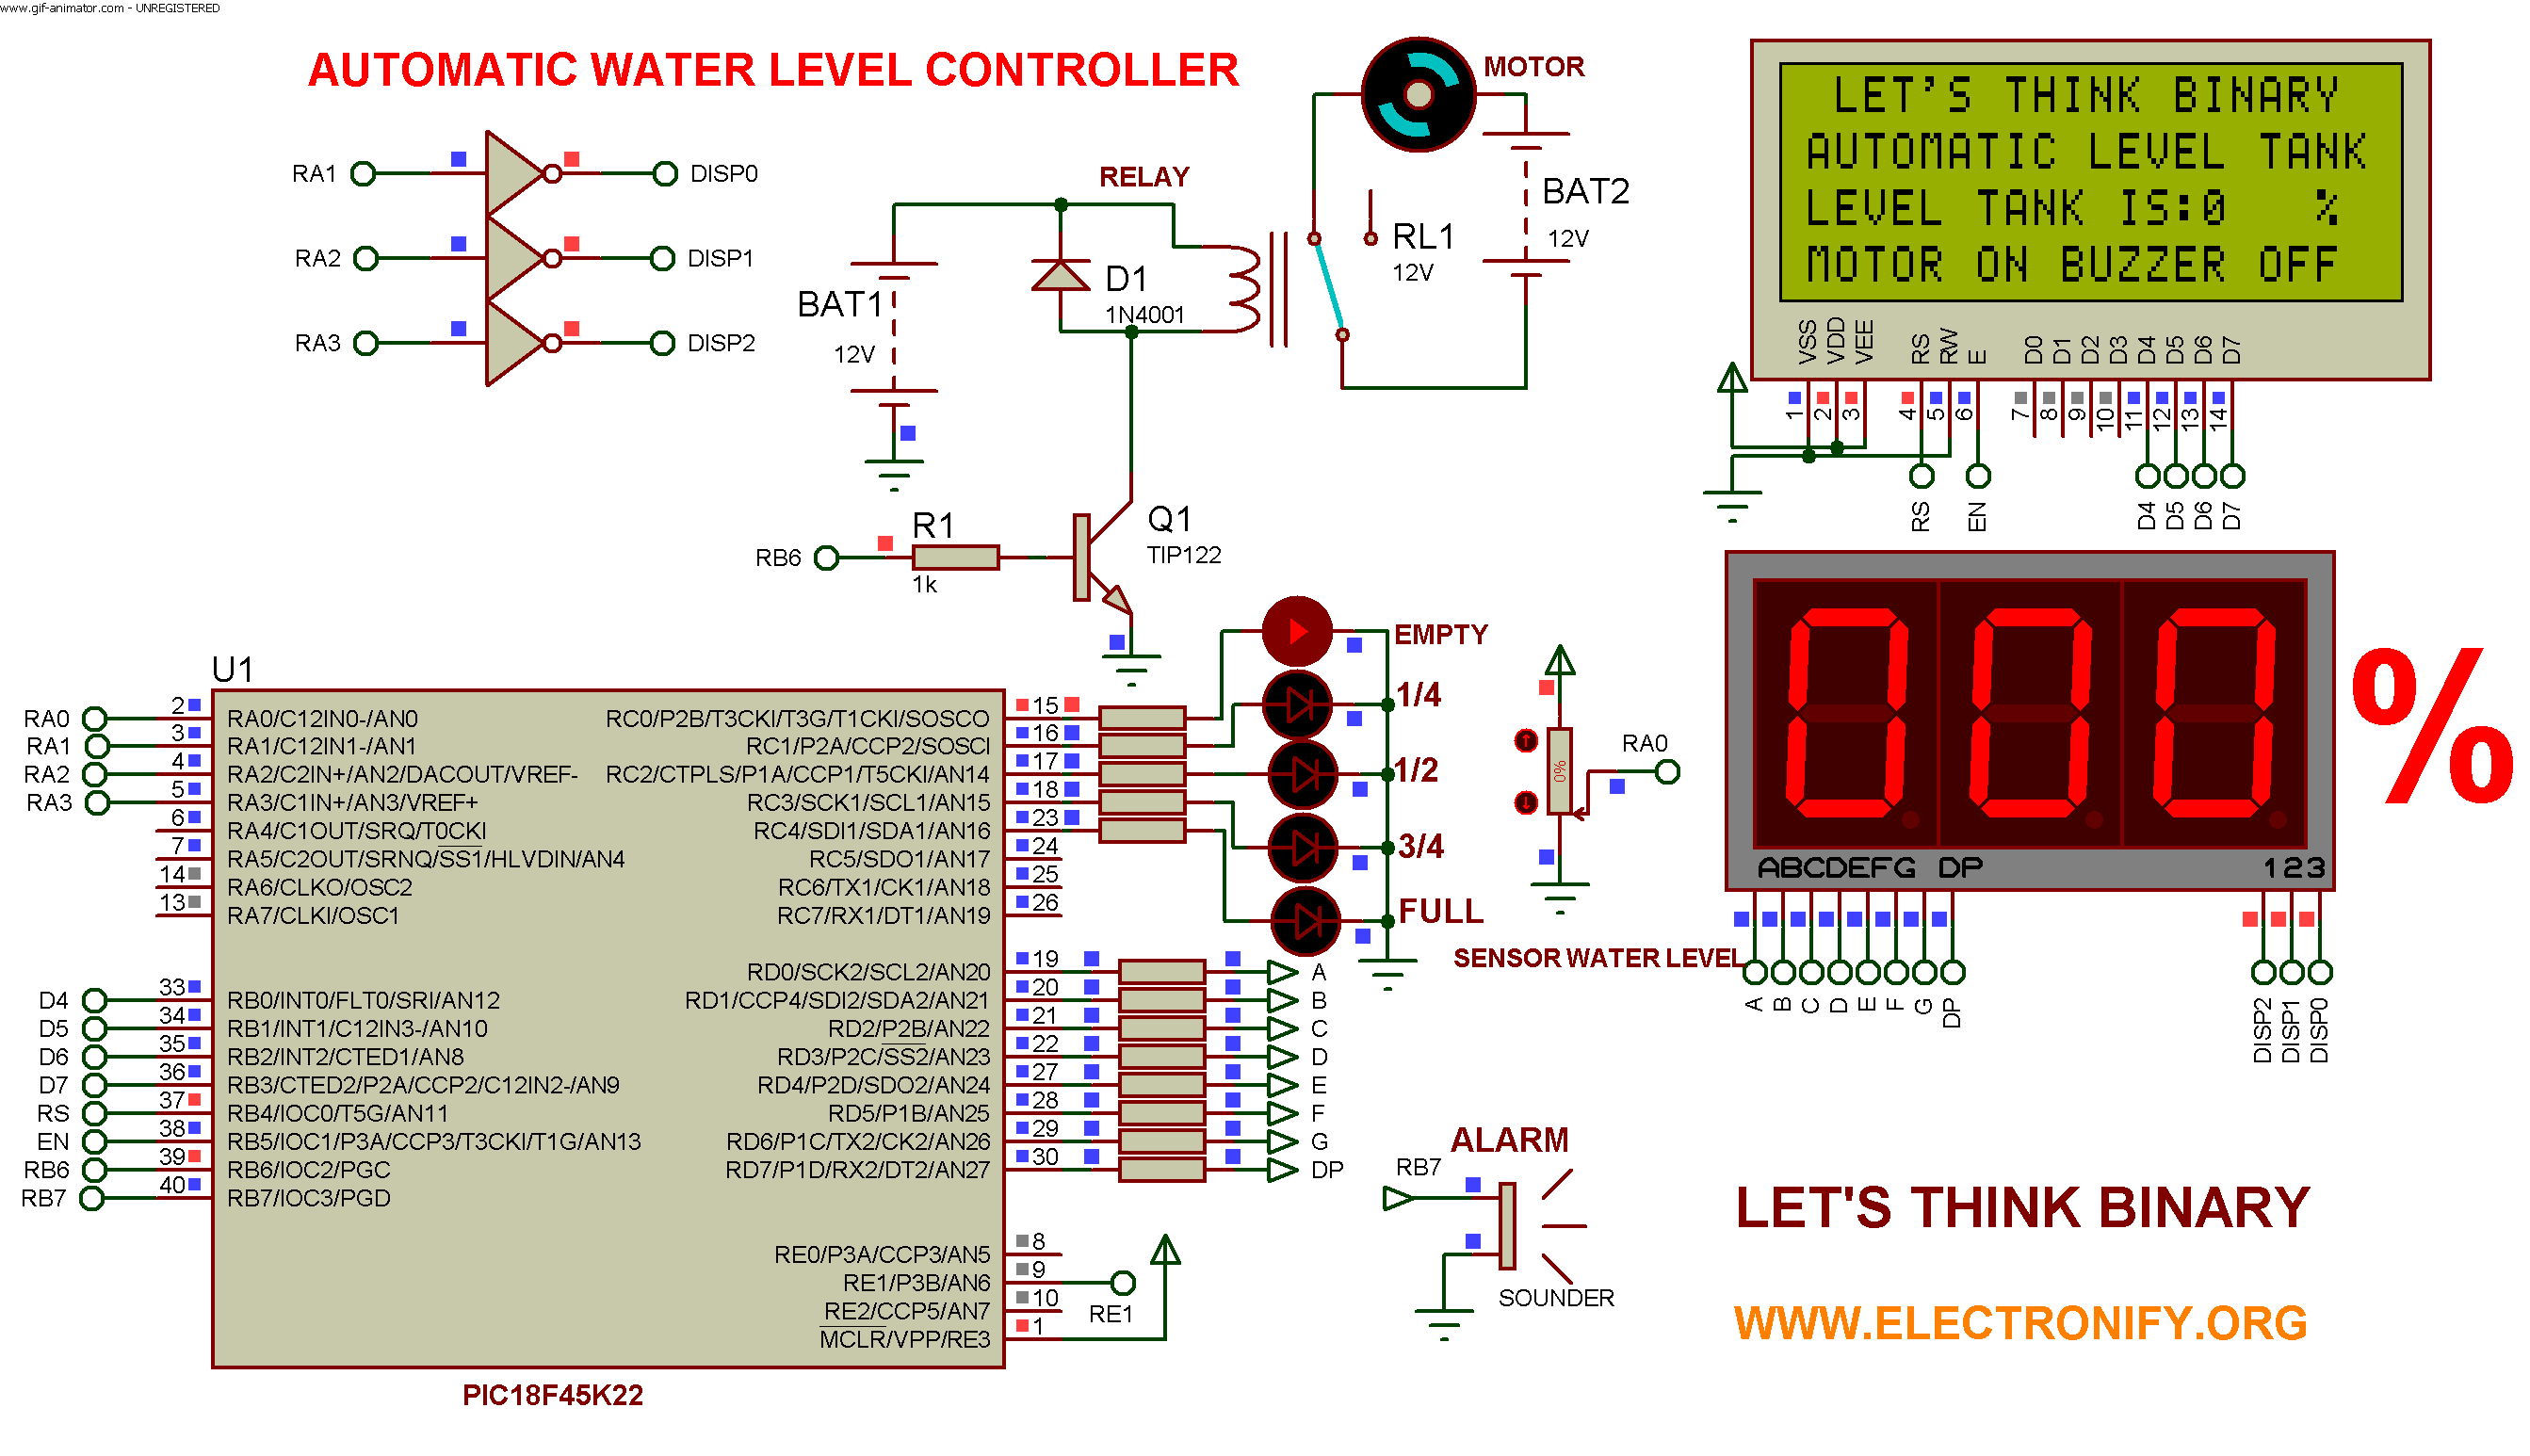 AUTOMATIC WATER LEVEL CONTROLLER USING MICROCONTROLLER PIC18F45K22